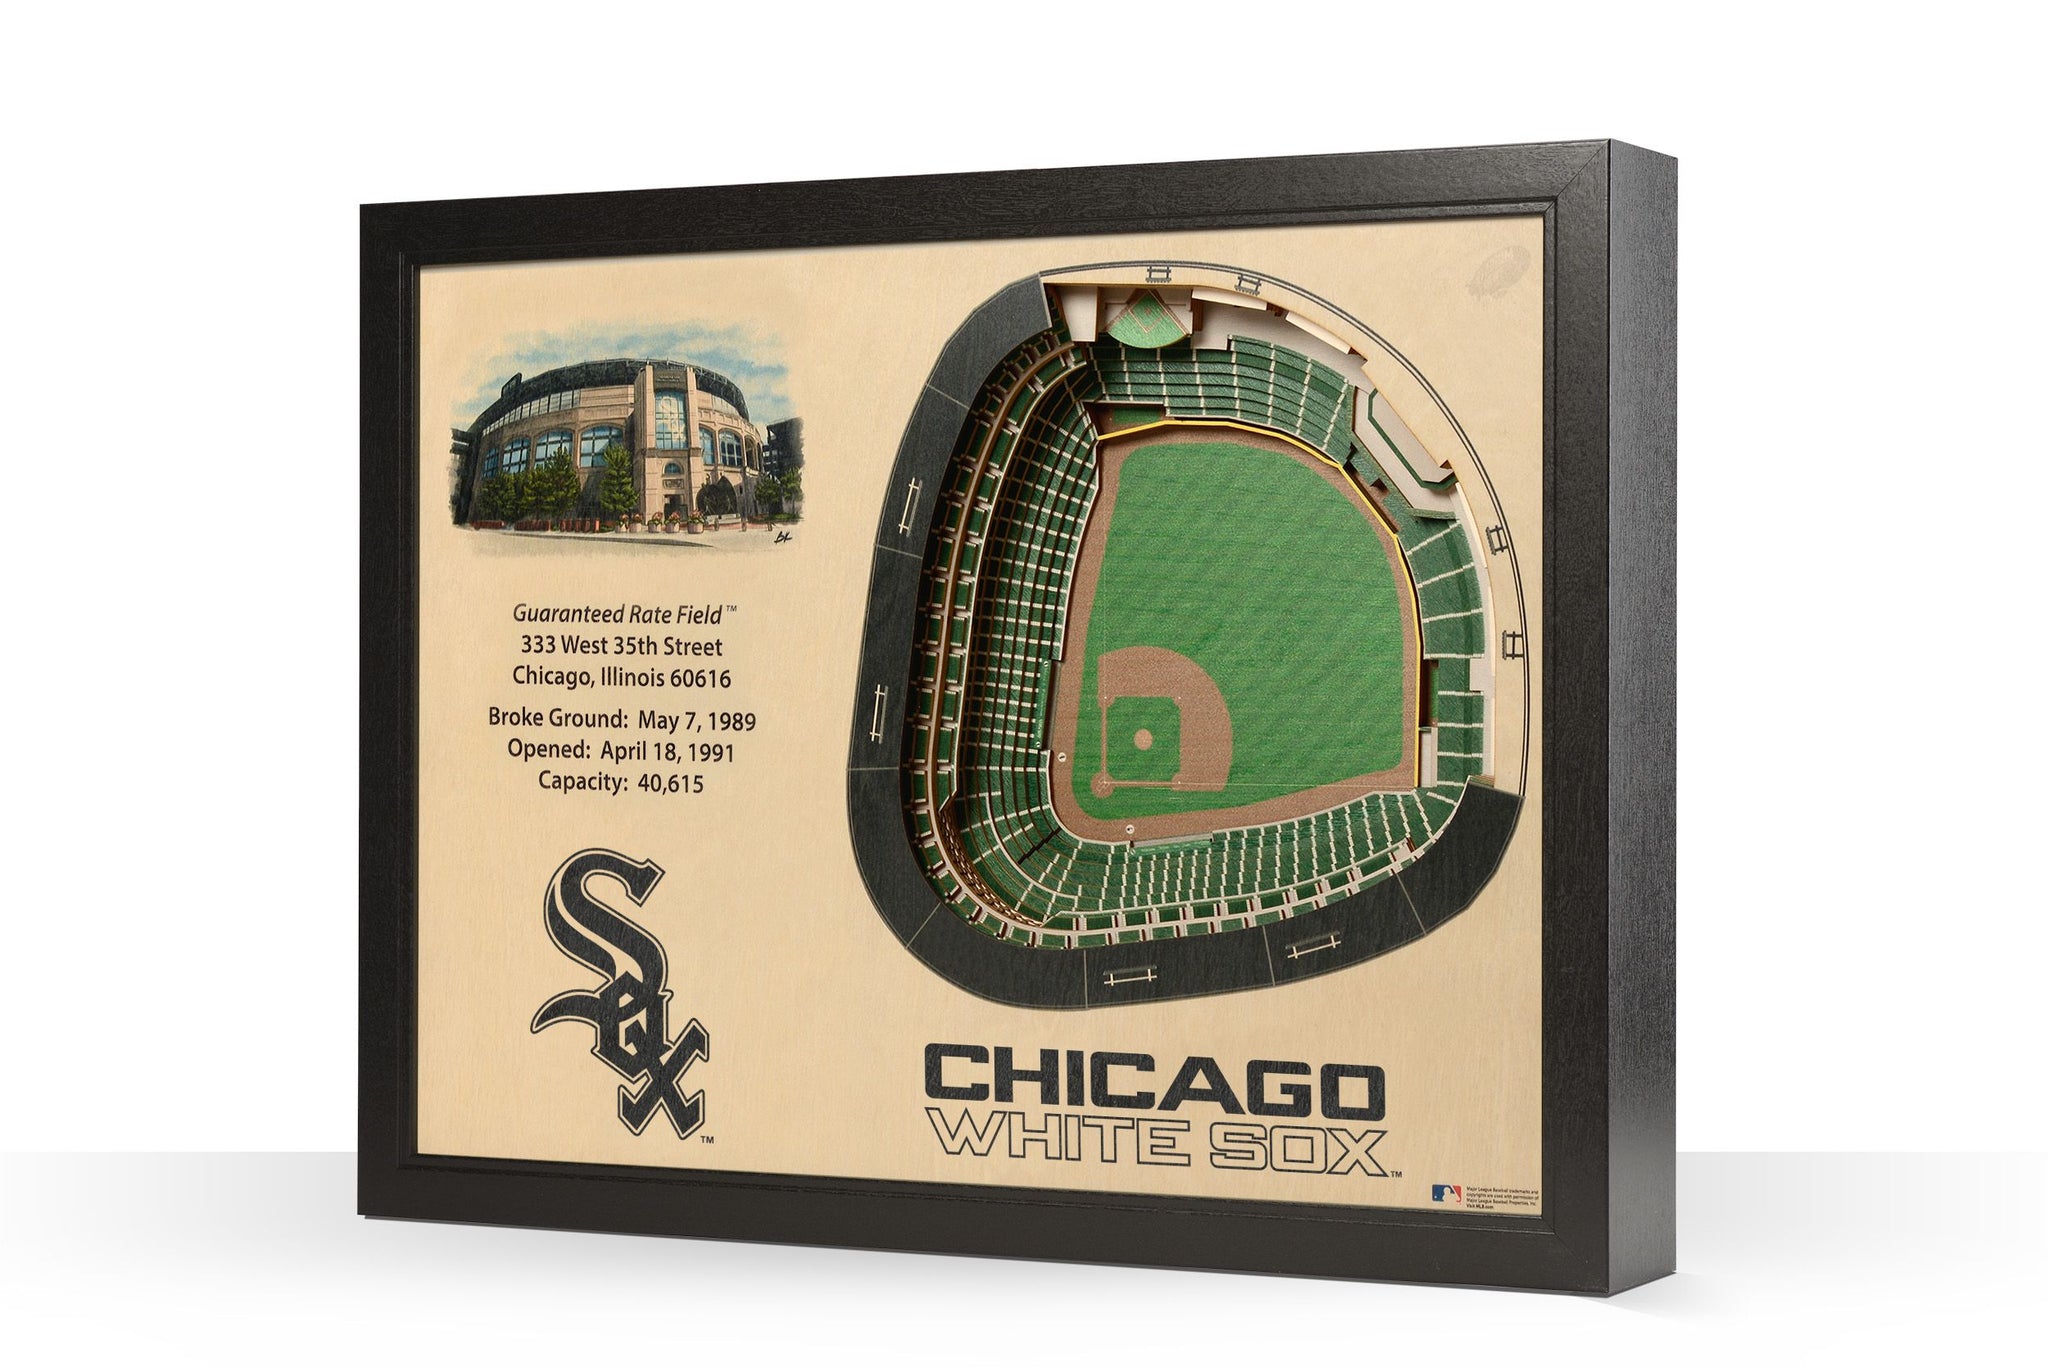 Chicago White Sox/U.S. Cellular Field Wall Mural